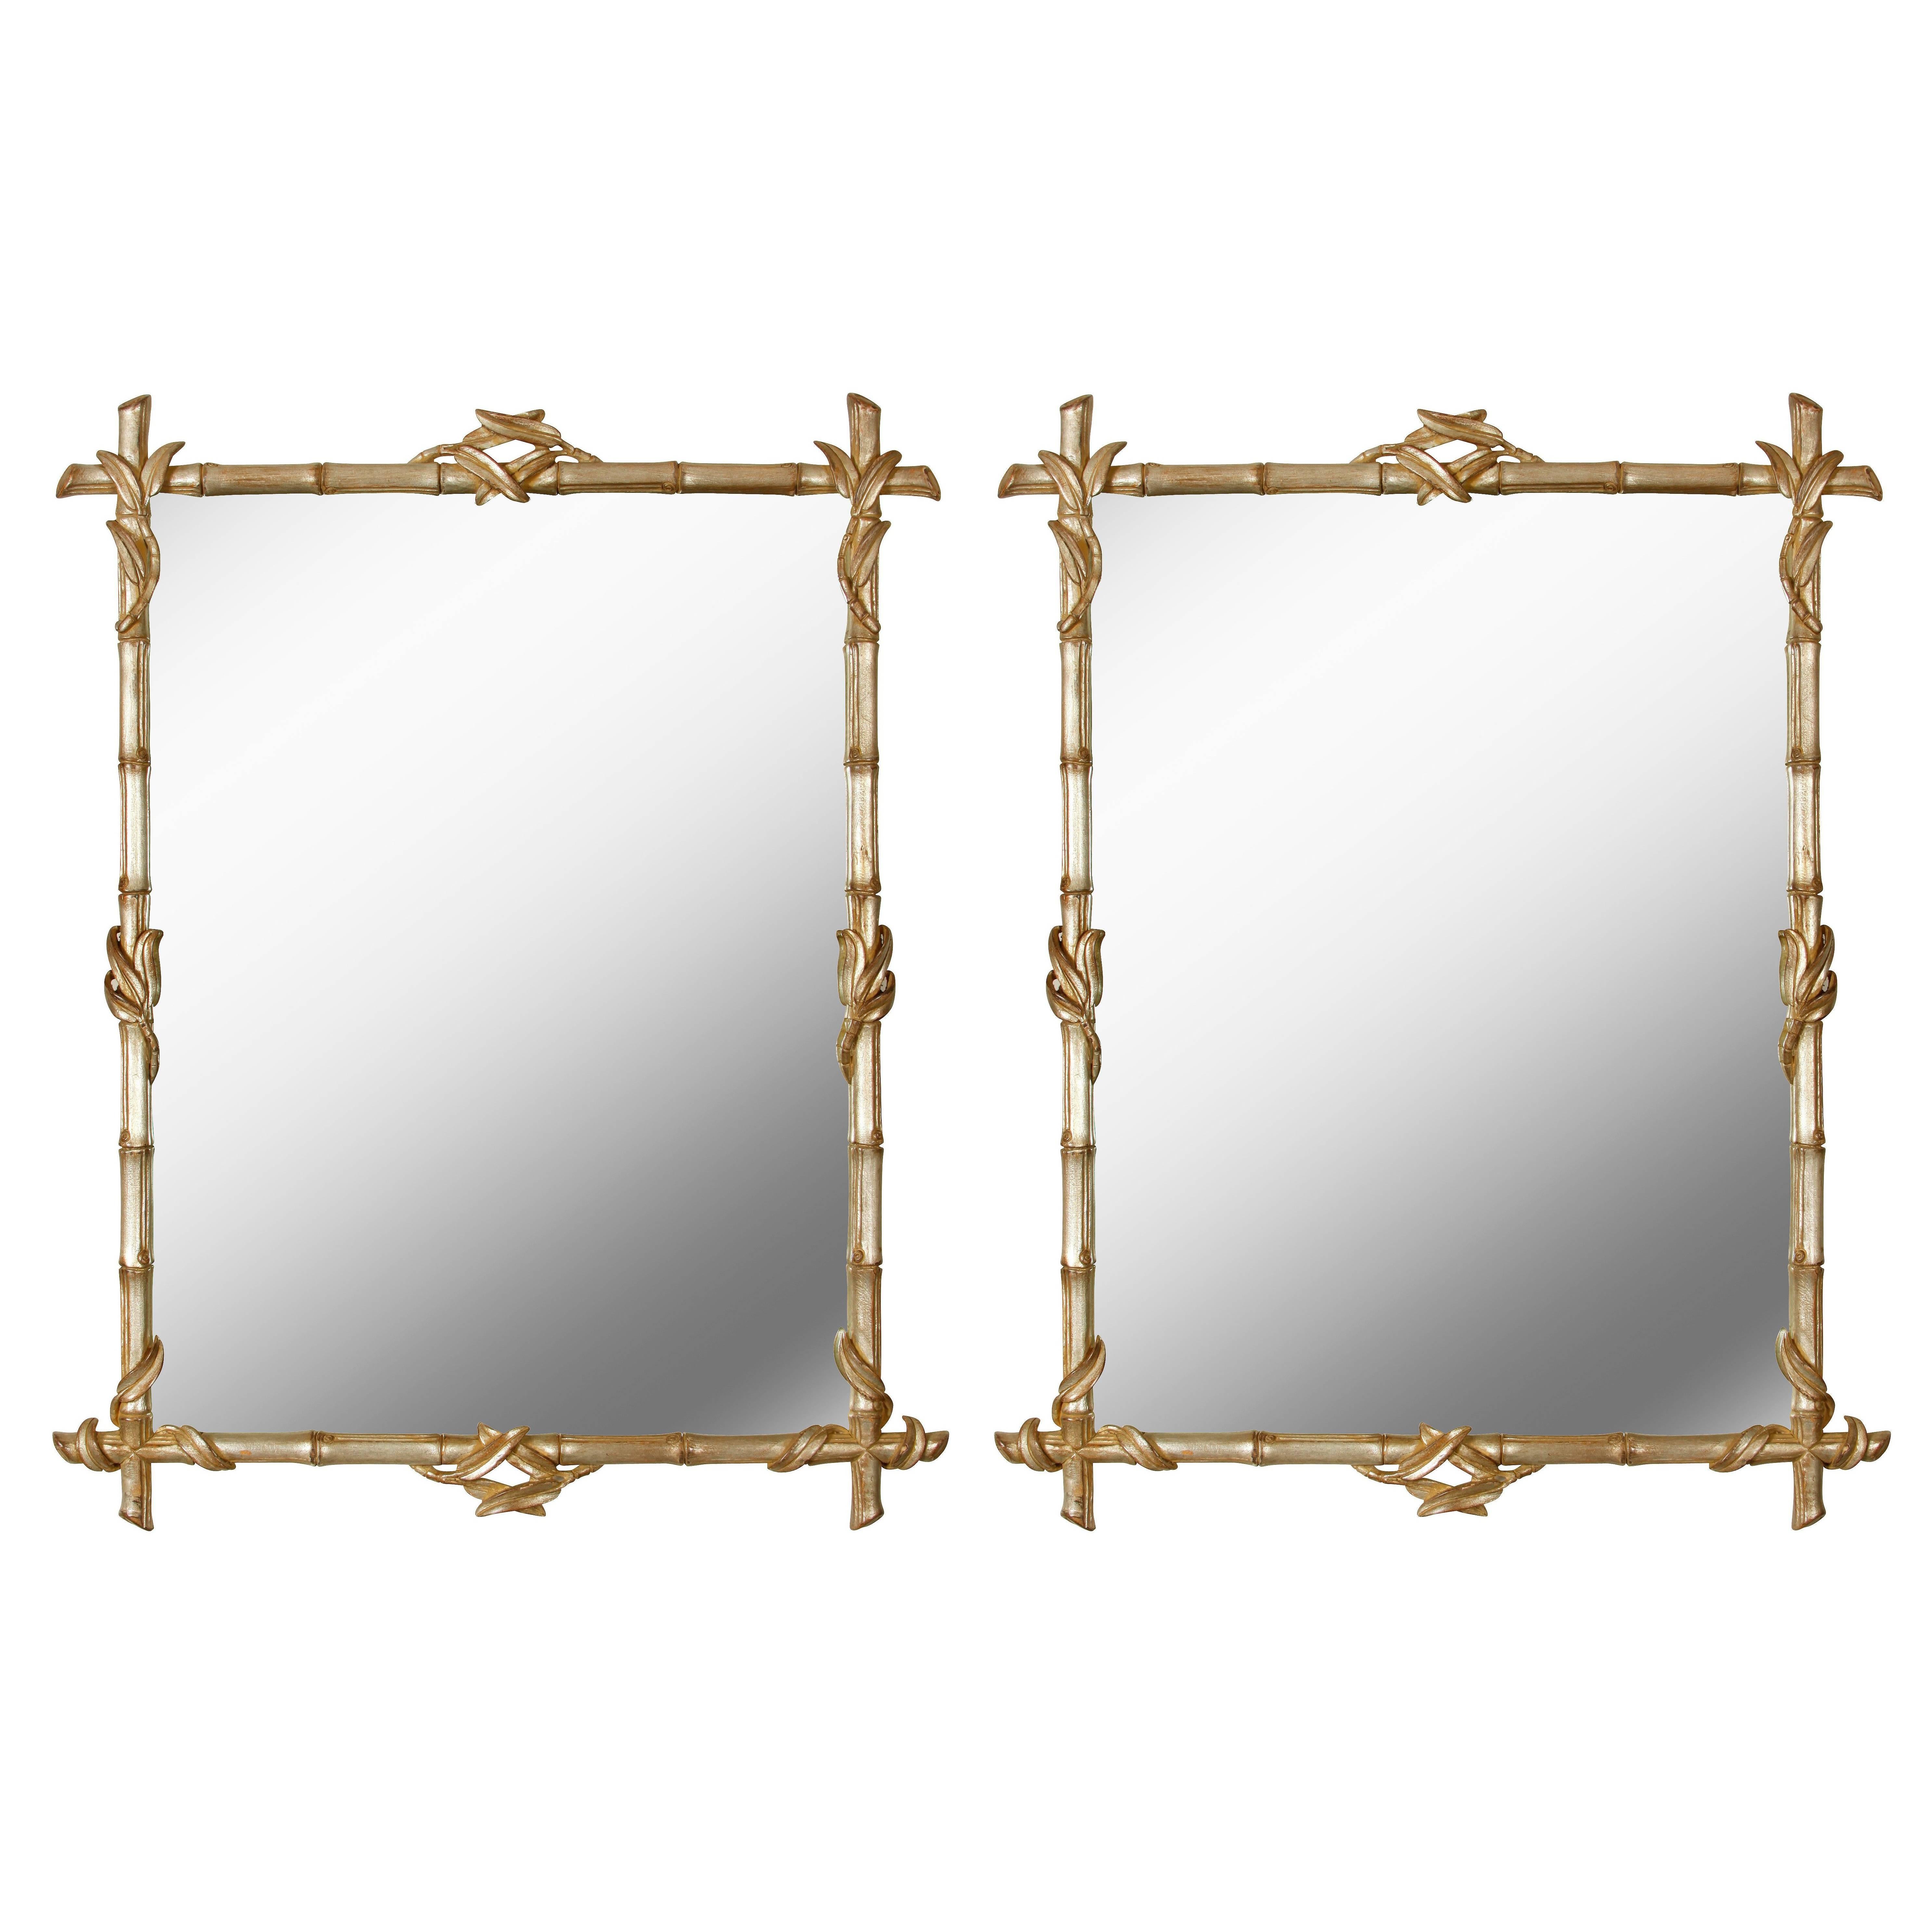 Pair of Silvered Faux Bamboo Mirrors